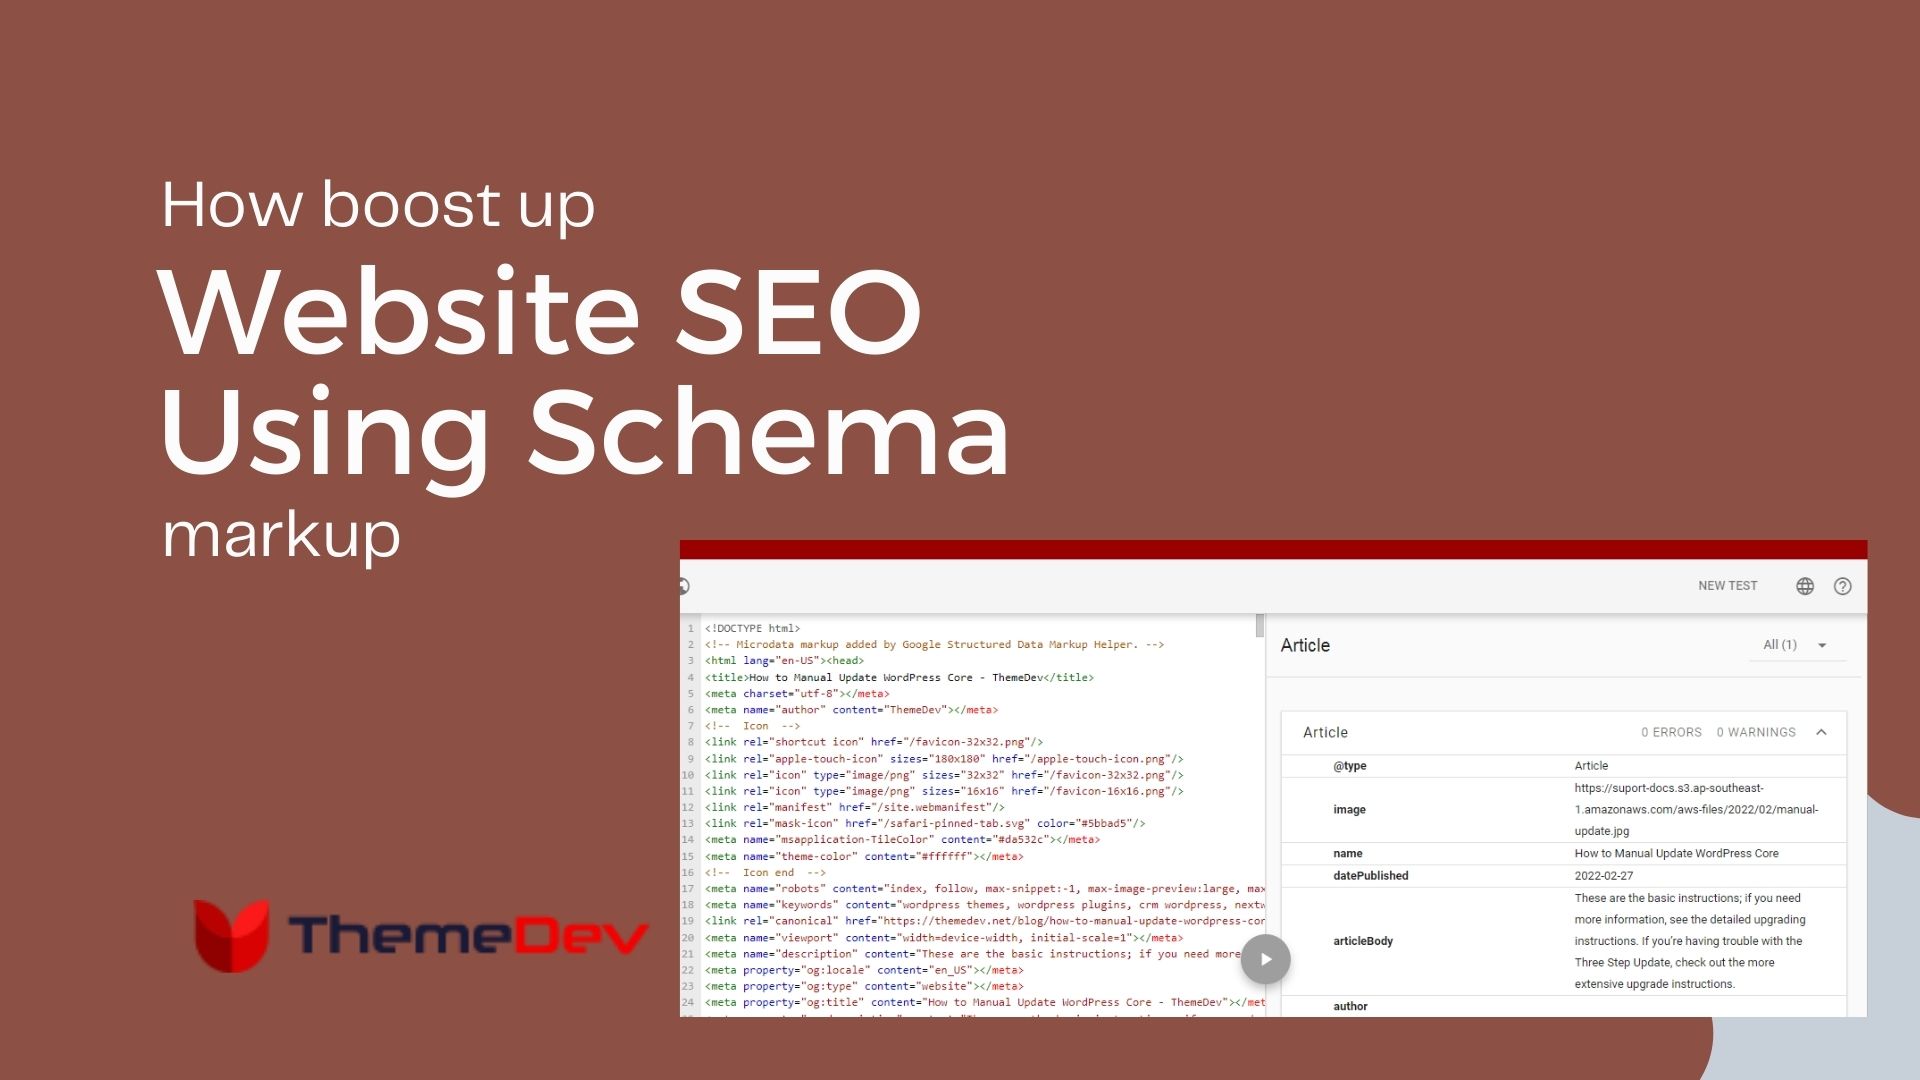 How to Boost WebSite SEO by Using Schema Markup